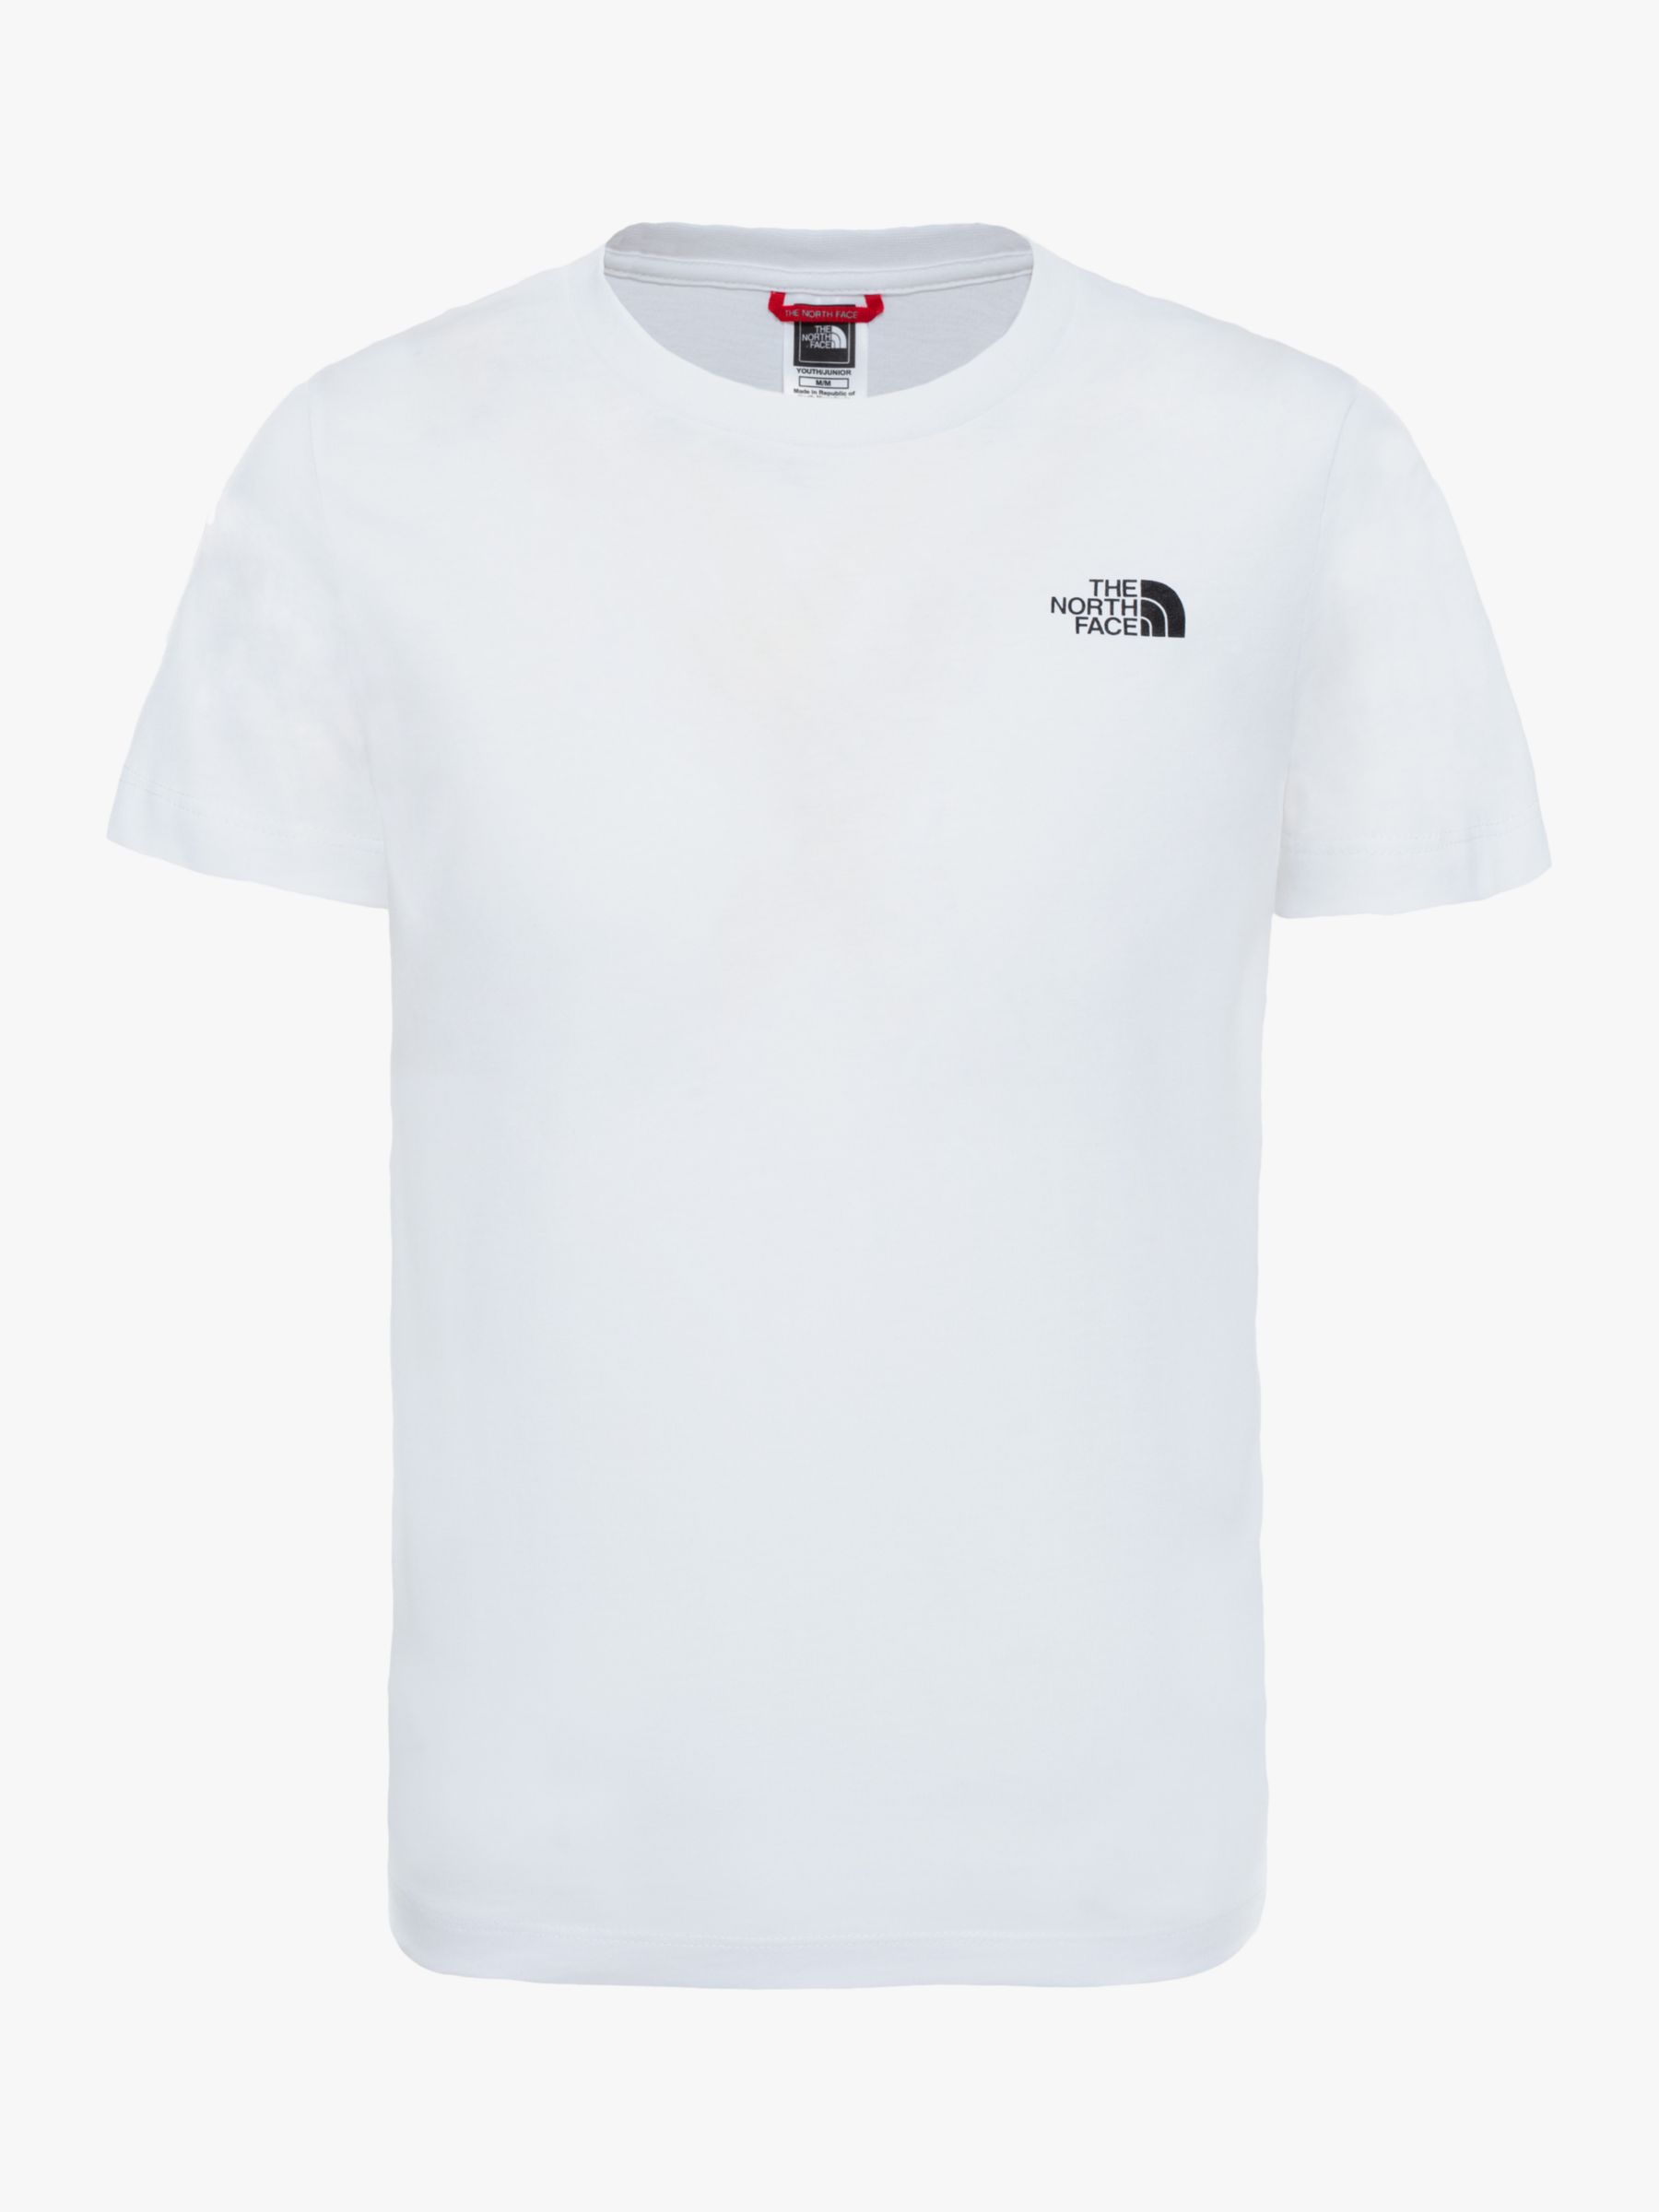 Image of The North Face Boys Dome TShirt